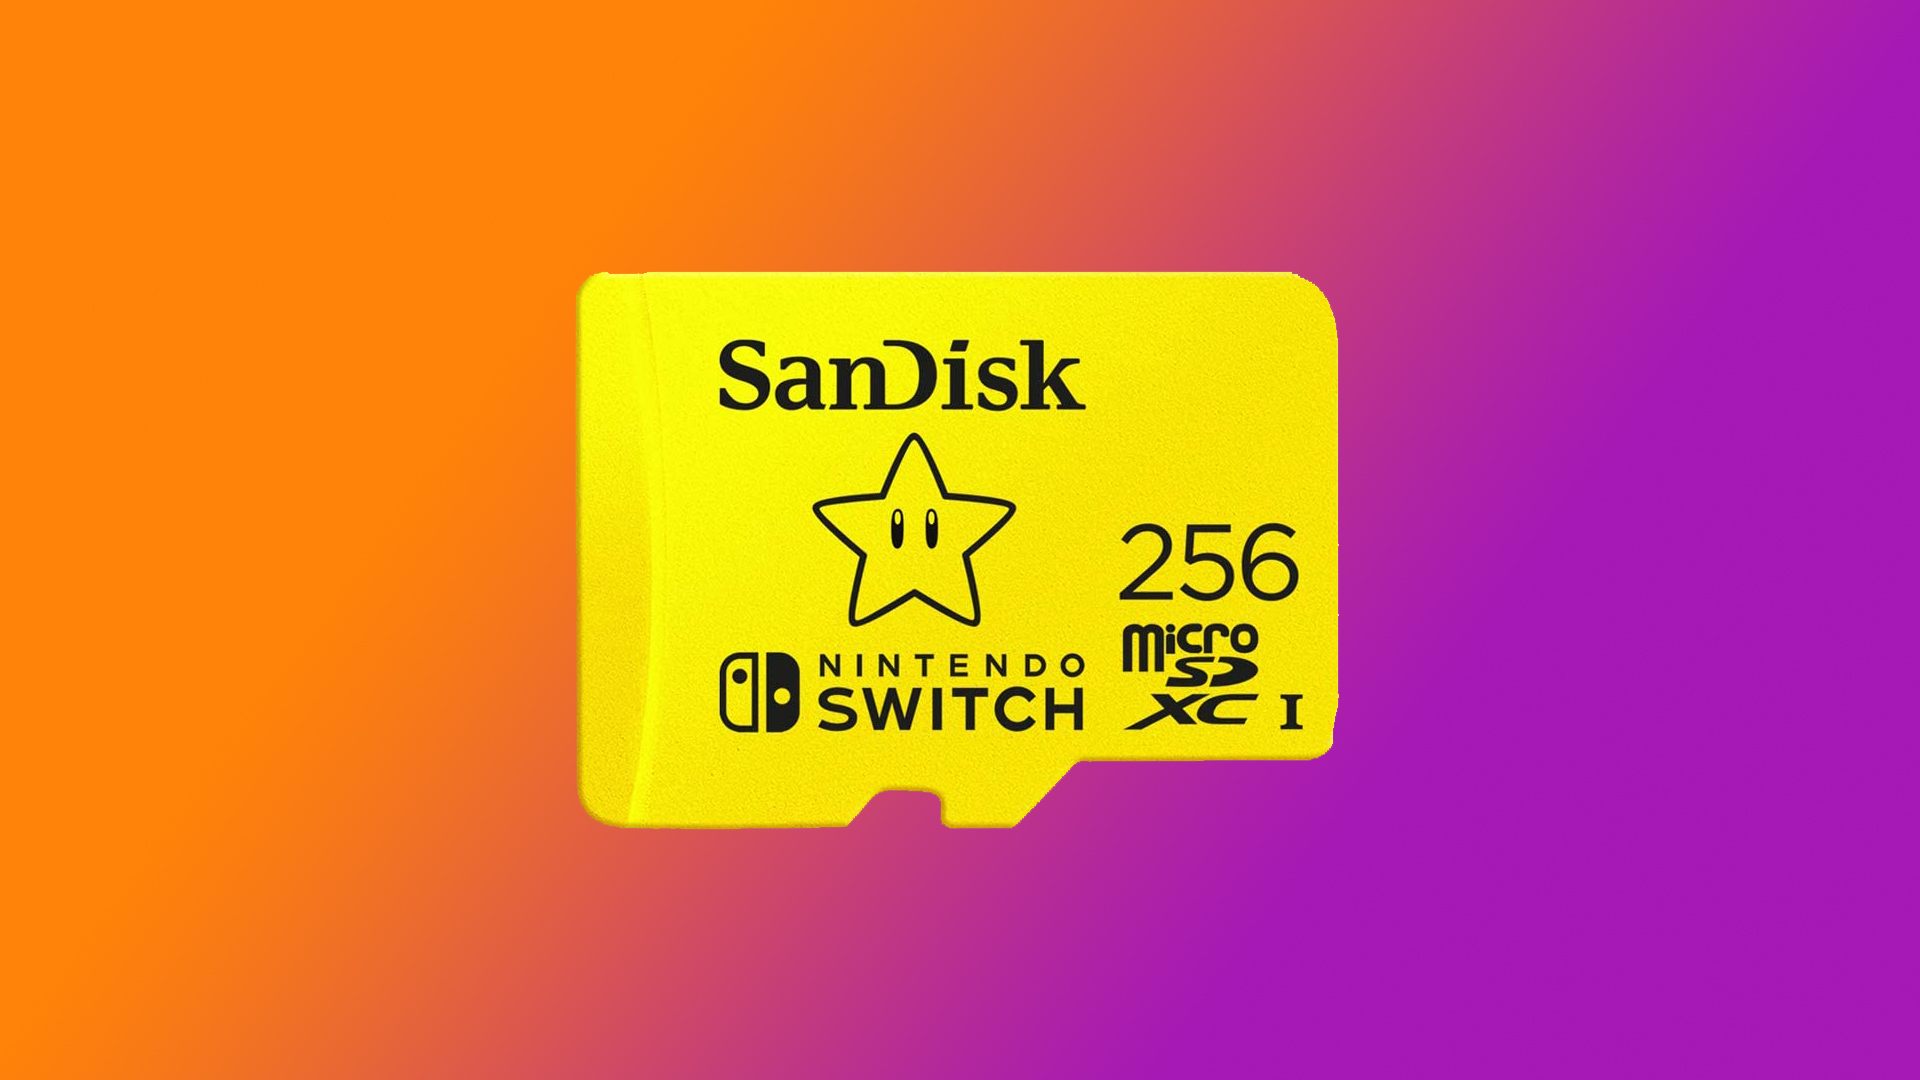 Pick Up a 512GB Nintendo Switch Compatible Micro SDXC Card for